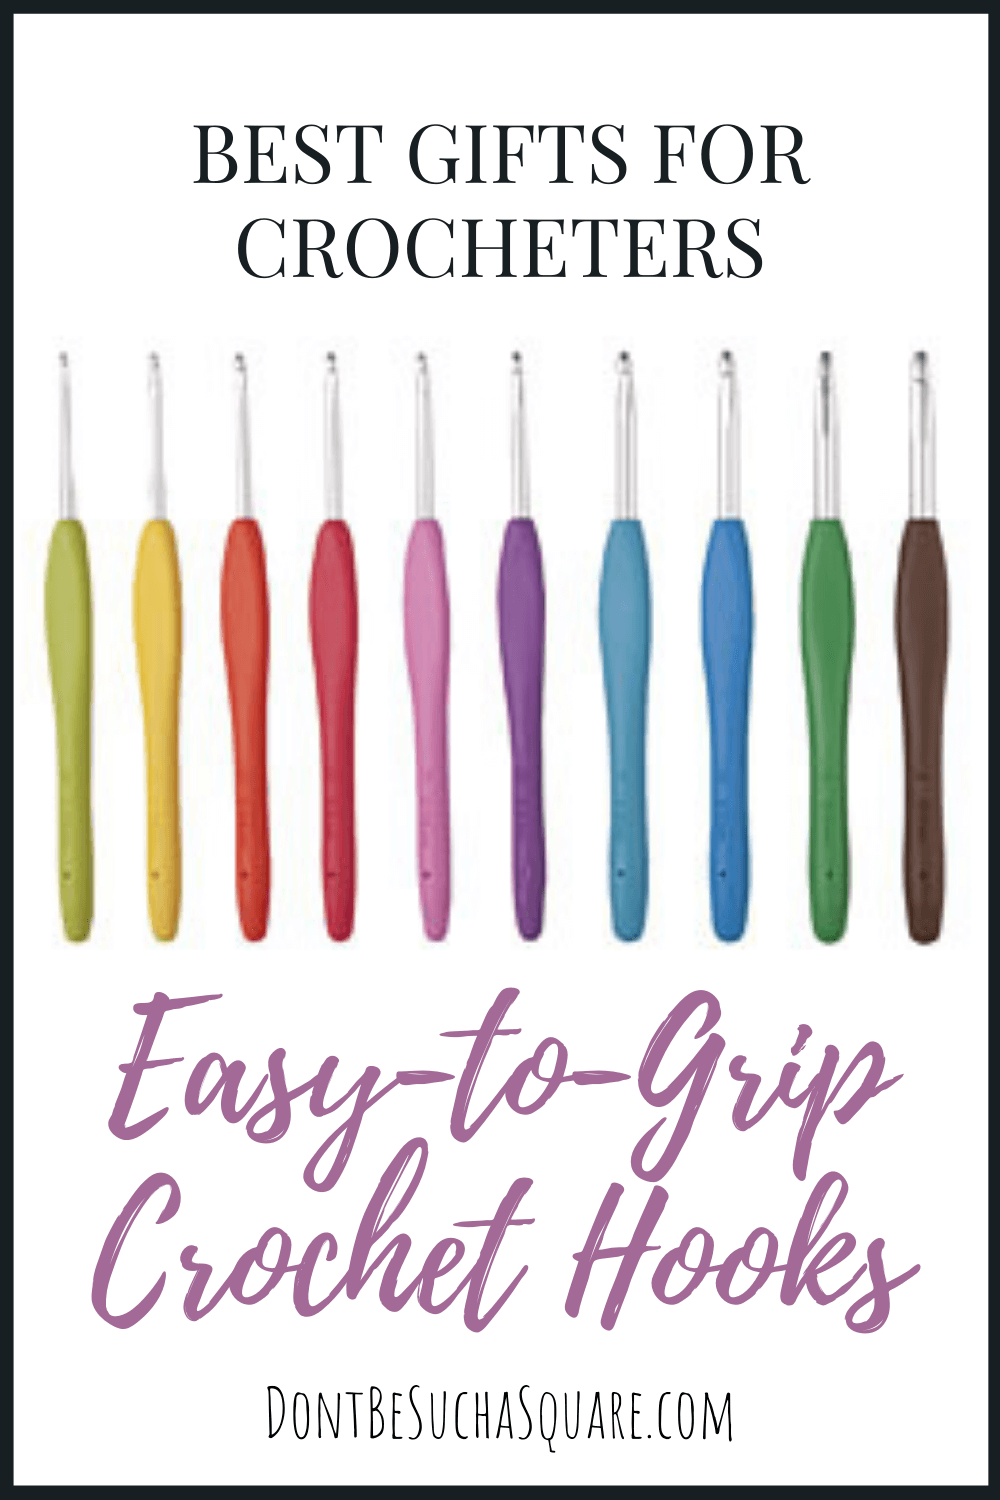 Amour crochet hooks comes in all the color of the rainbow. A great gift for crocheters!